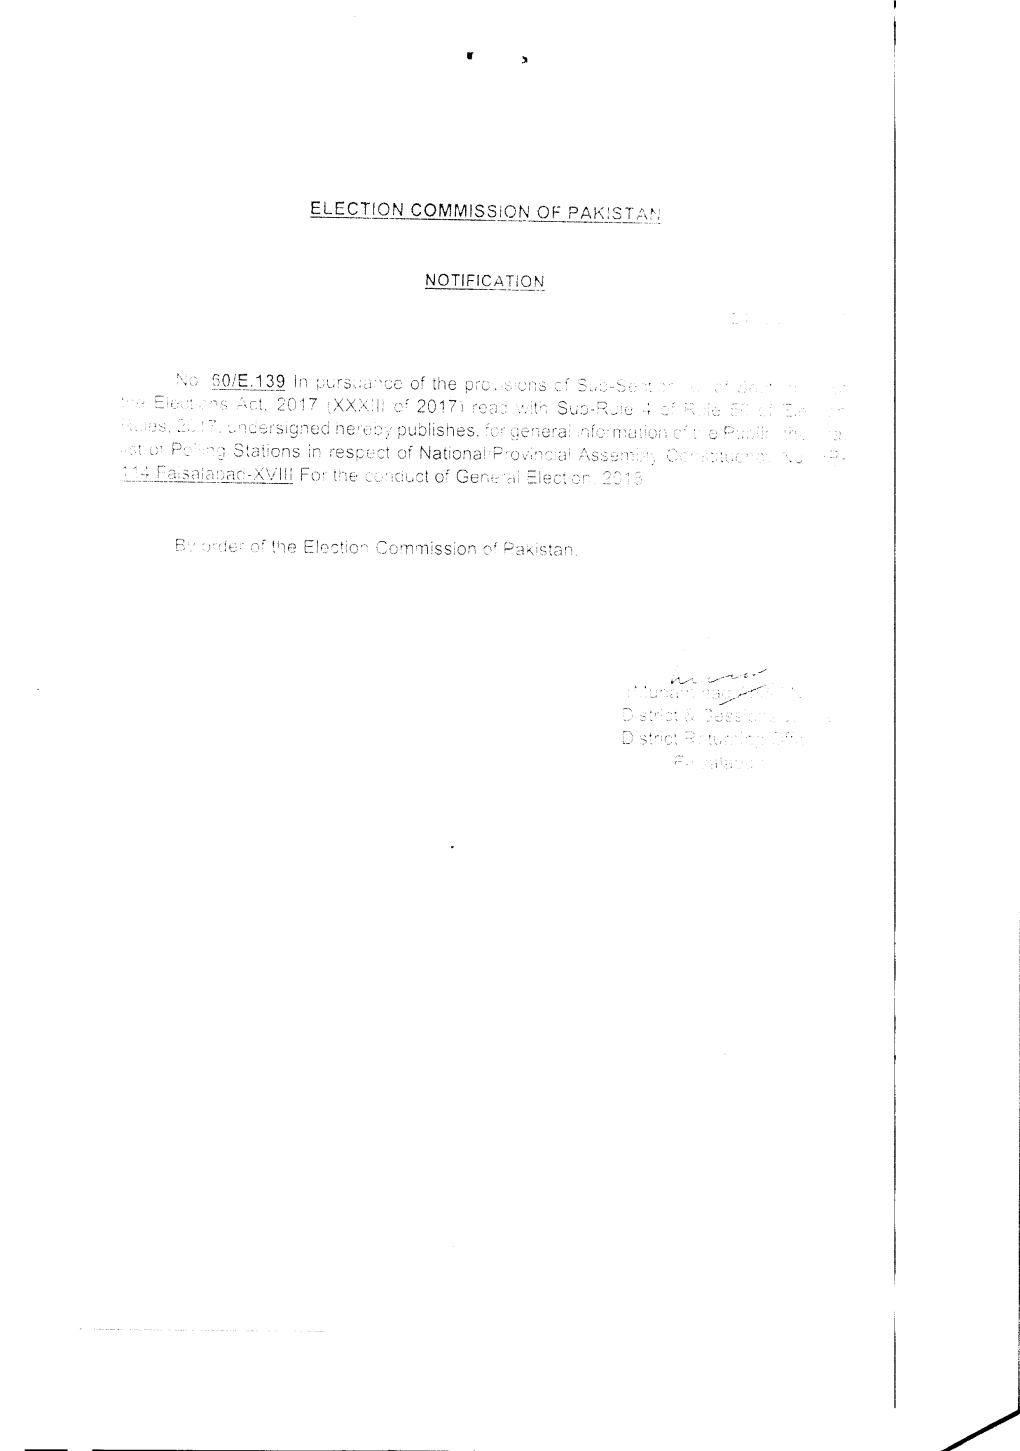 Election Commission of Pakistan Notification 2